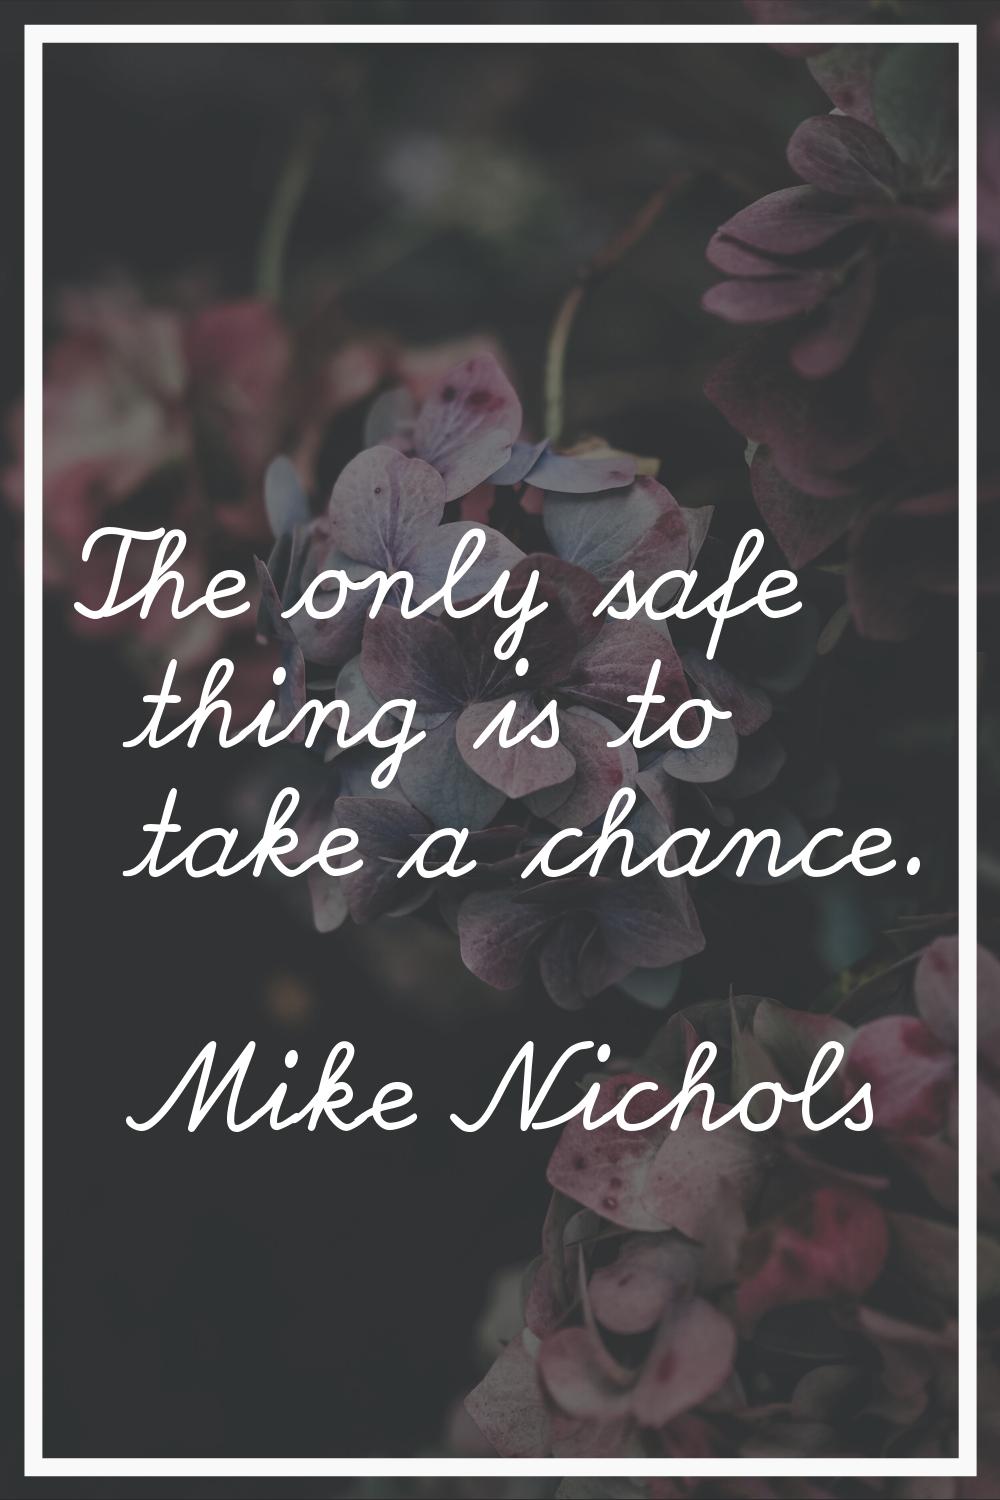 The only safe thing is to take a chance.